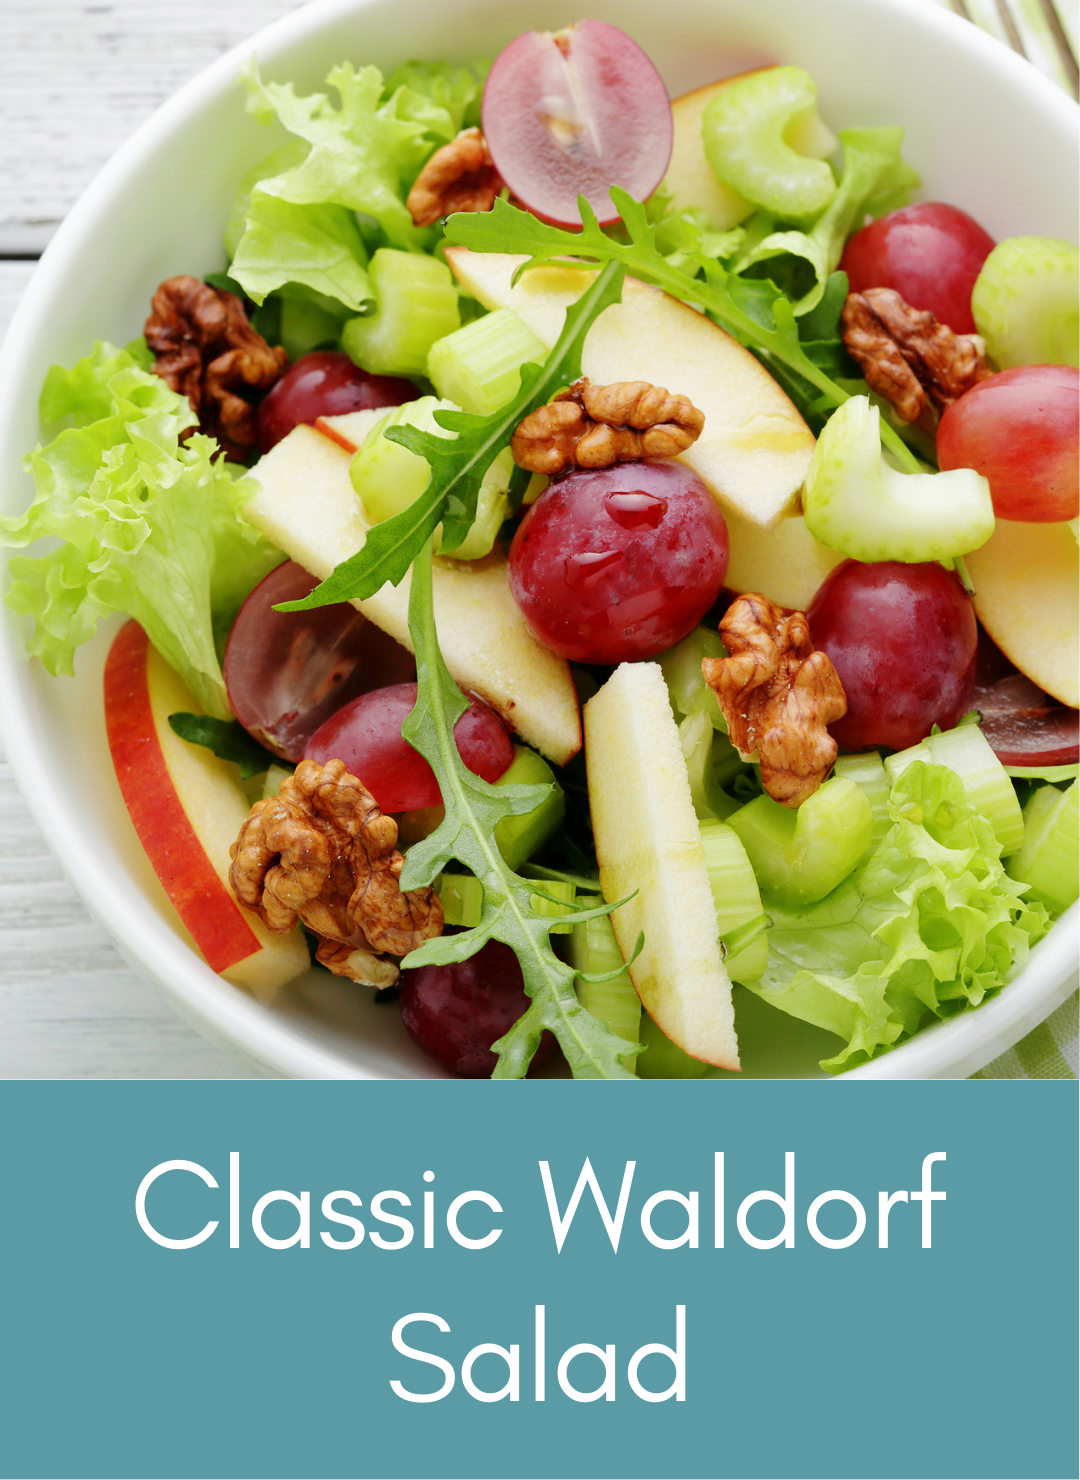 Whole food plant based classic Waldorf salad Picture with link to recipe